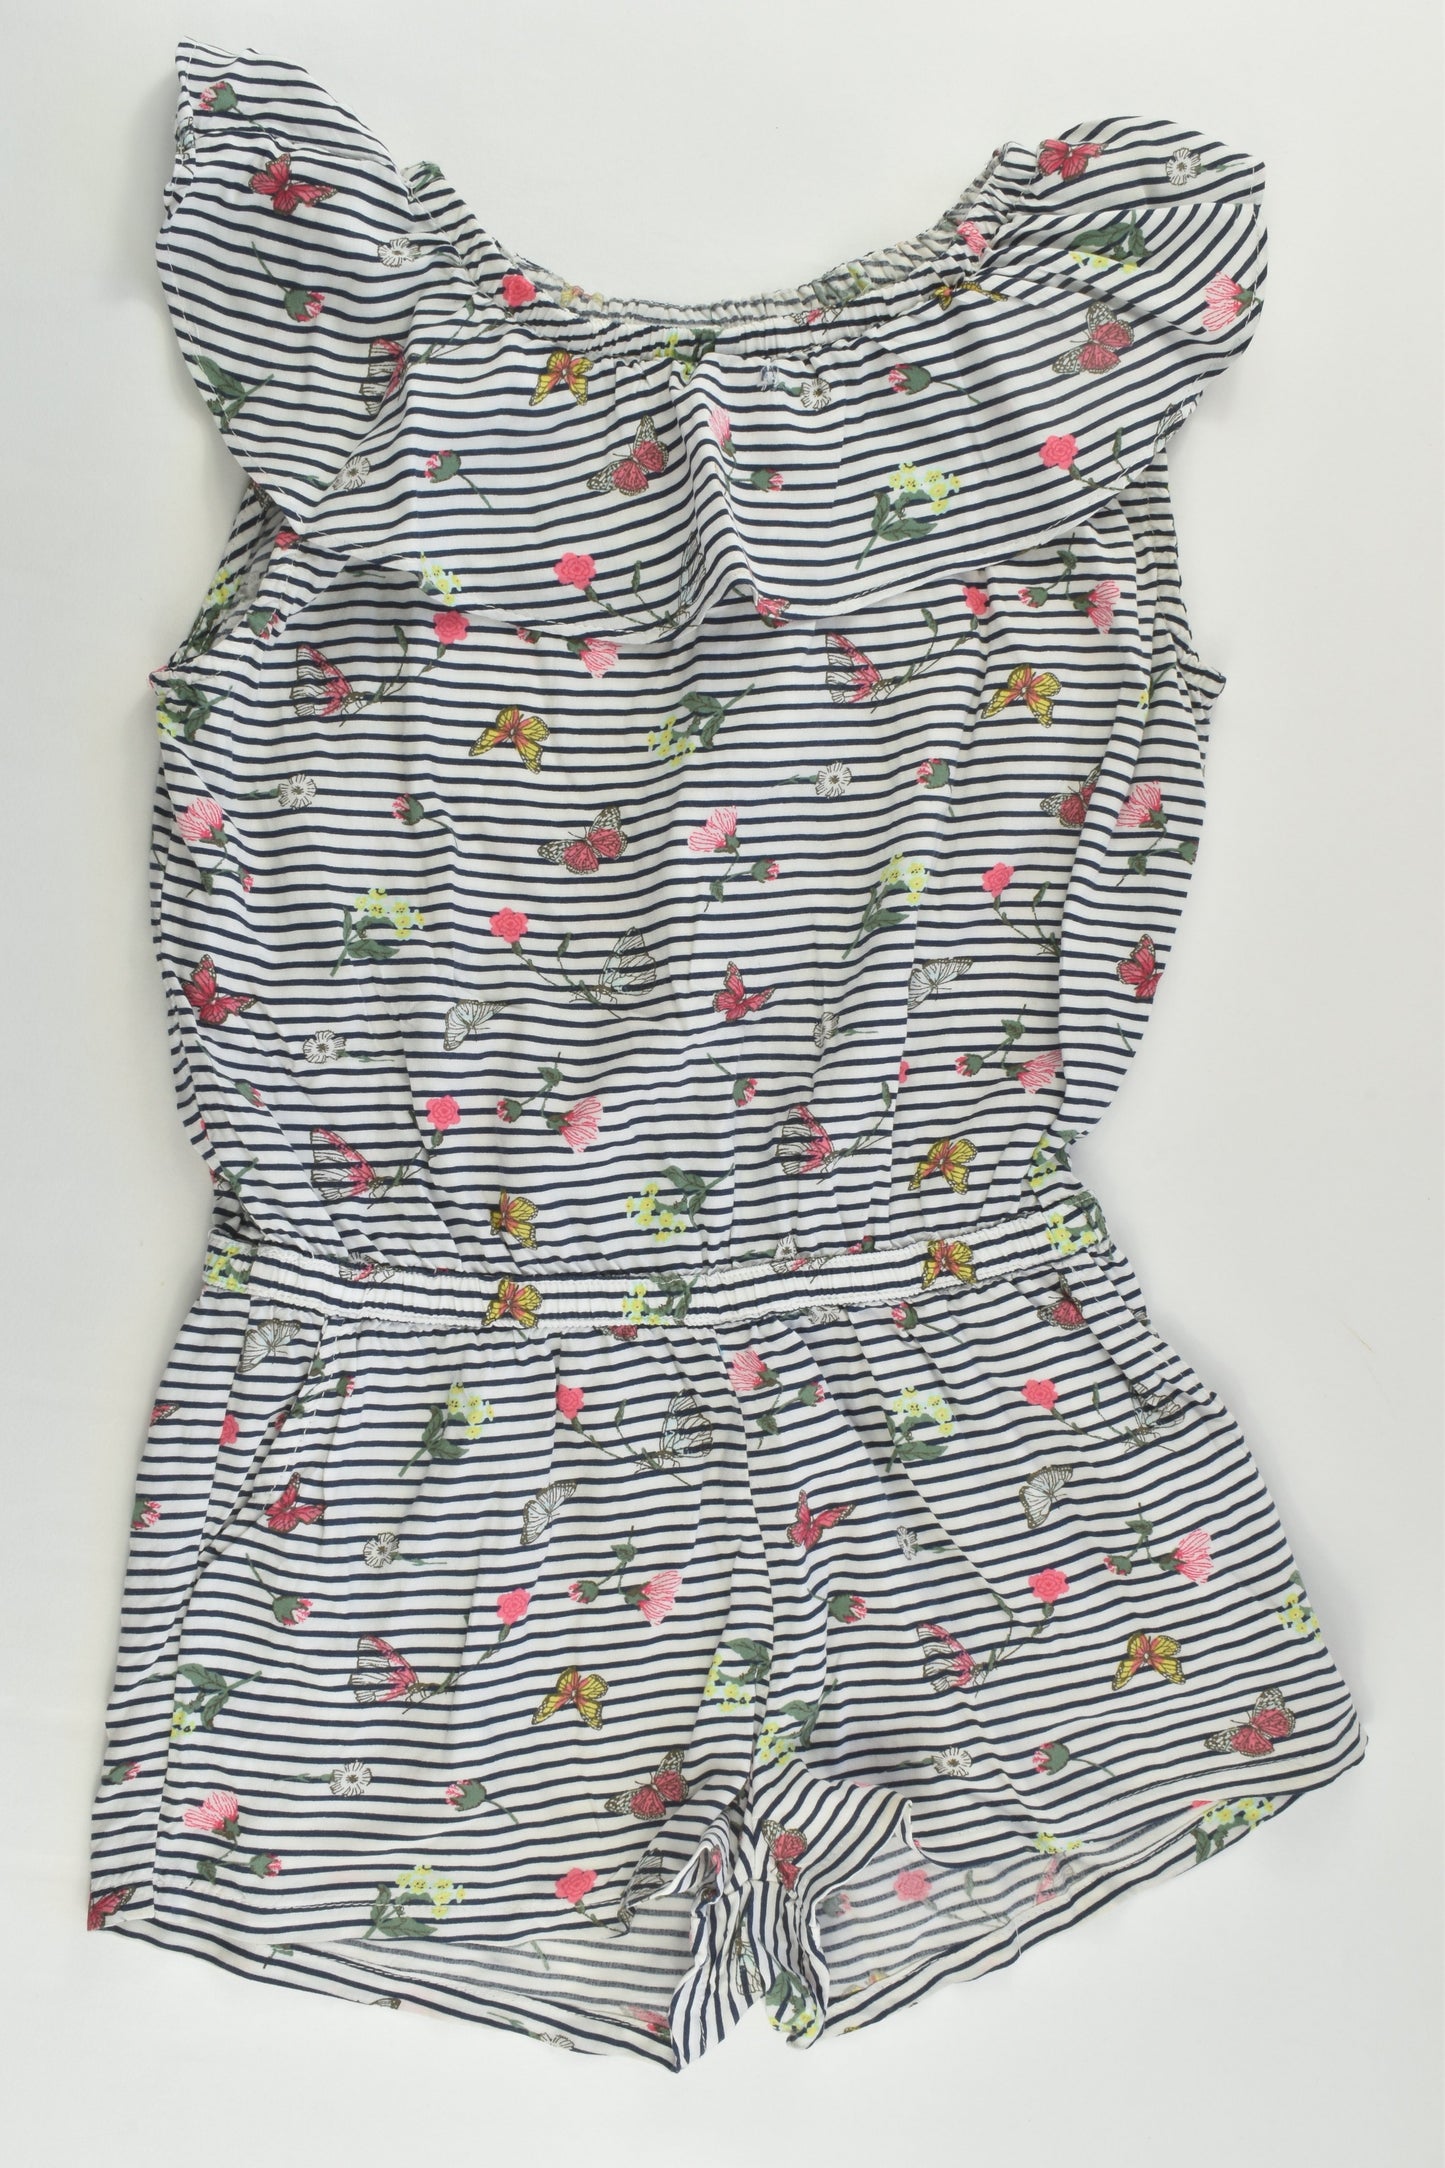 Hema Size 3-4 (98/104 cm) Butterflies and Flowers Playsuit